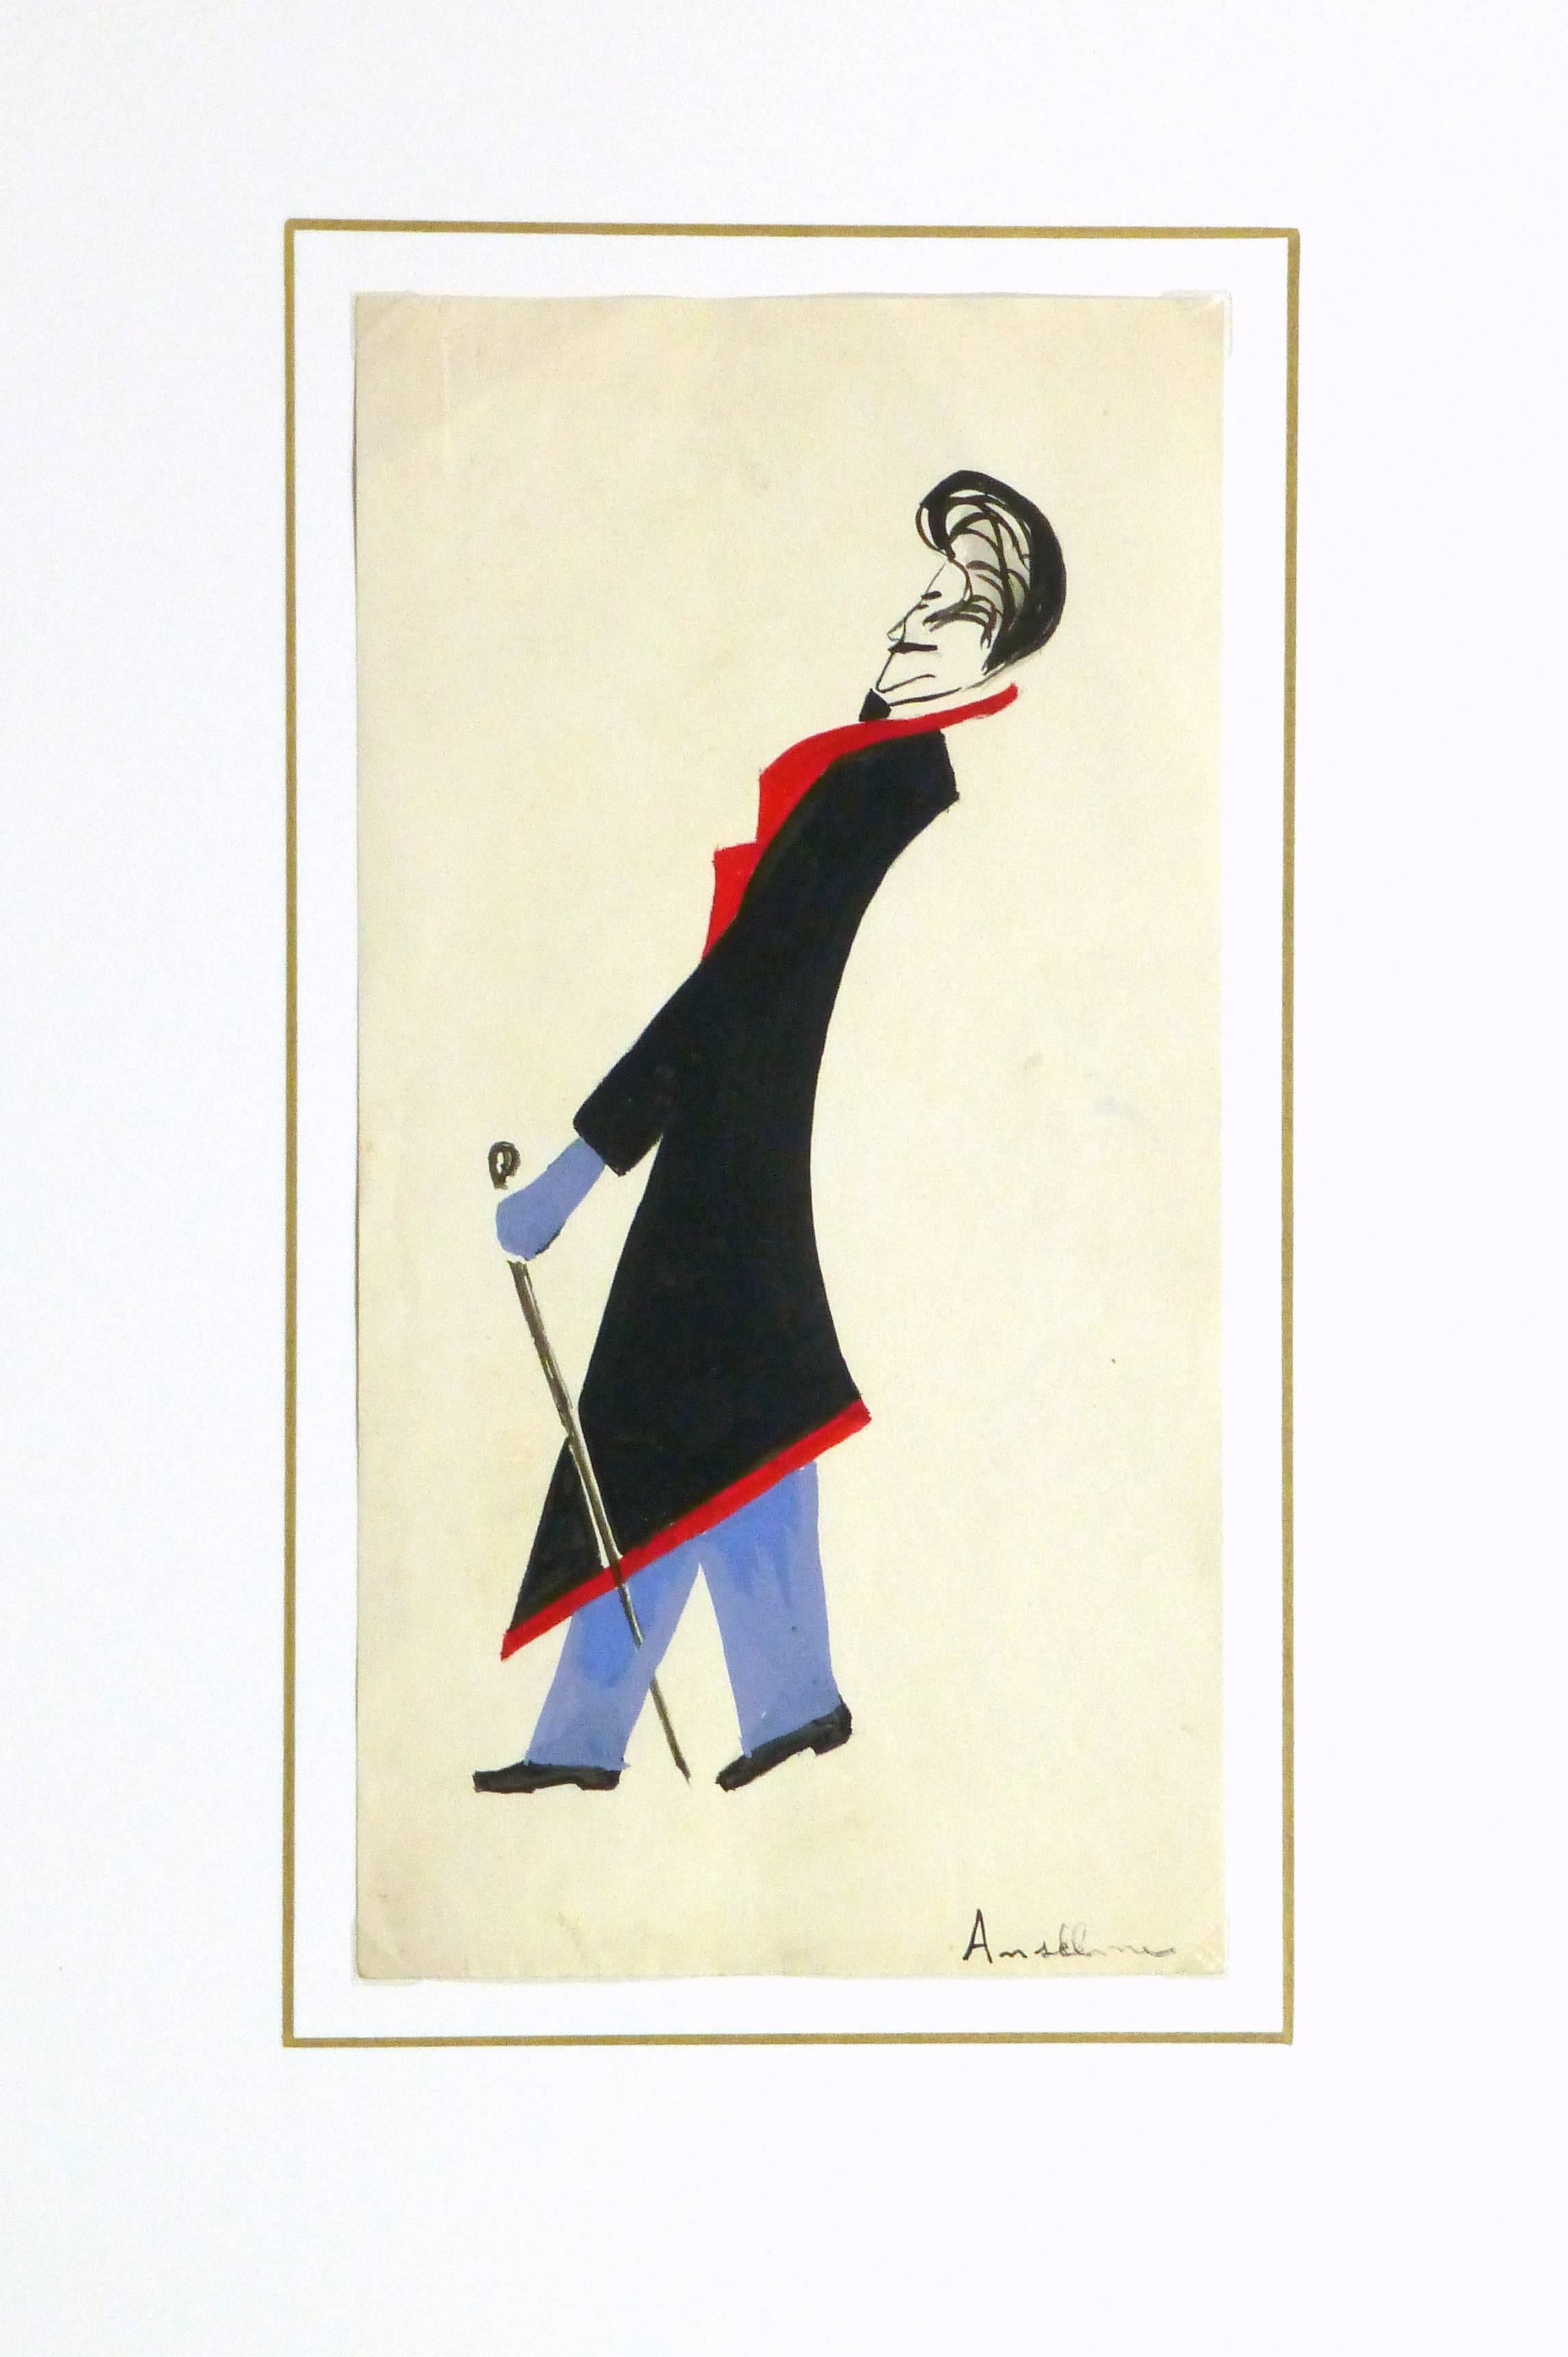 Playful gouache painting of a theatrical costume of a dapper gentleman for a Parisian theater by Anselme, circa 1920. Signed lower right. 

Original artwork on paper displayed on a white mat with a gold border. Archival plastic sleeve and